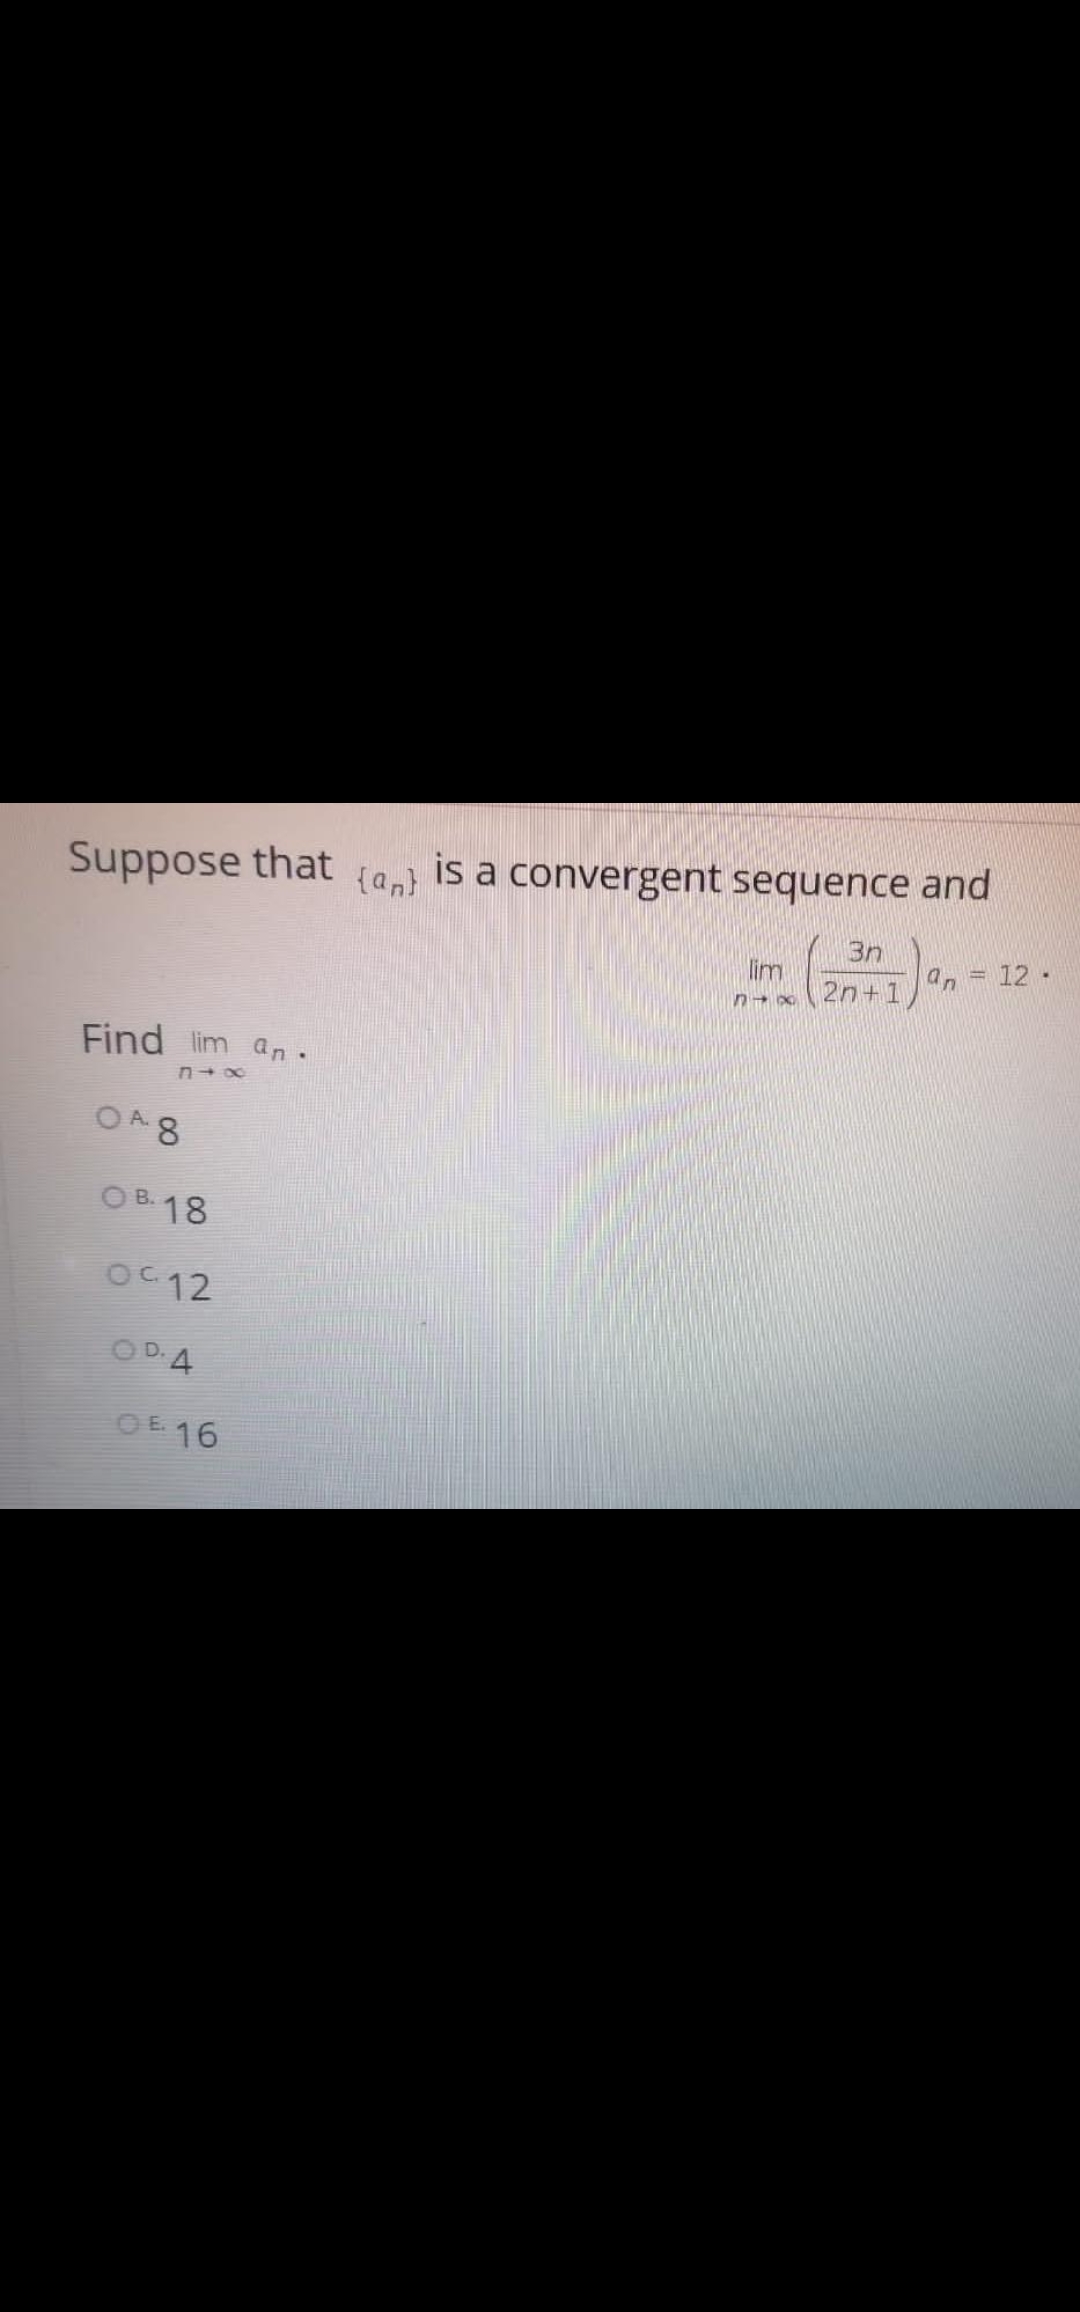 Suppose that
is a convergent sequence and
{an}
3n
= 12·
lim
2n+1
an
Find lim an.
O48
A.
O B. 18
OC12
OD.
OE 16
